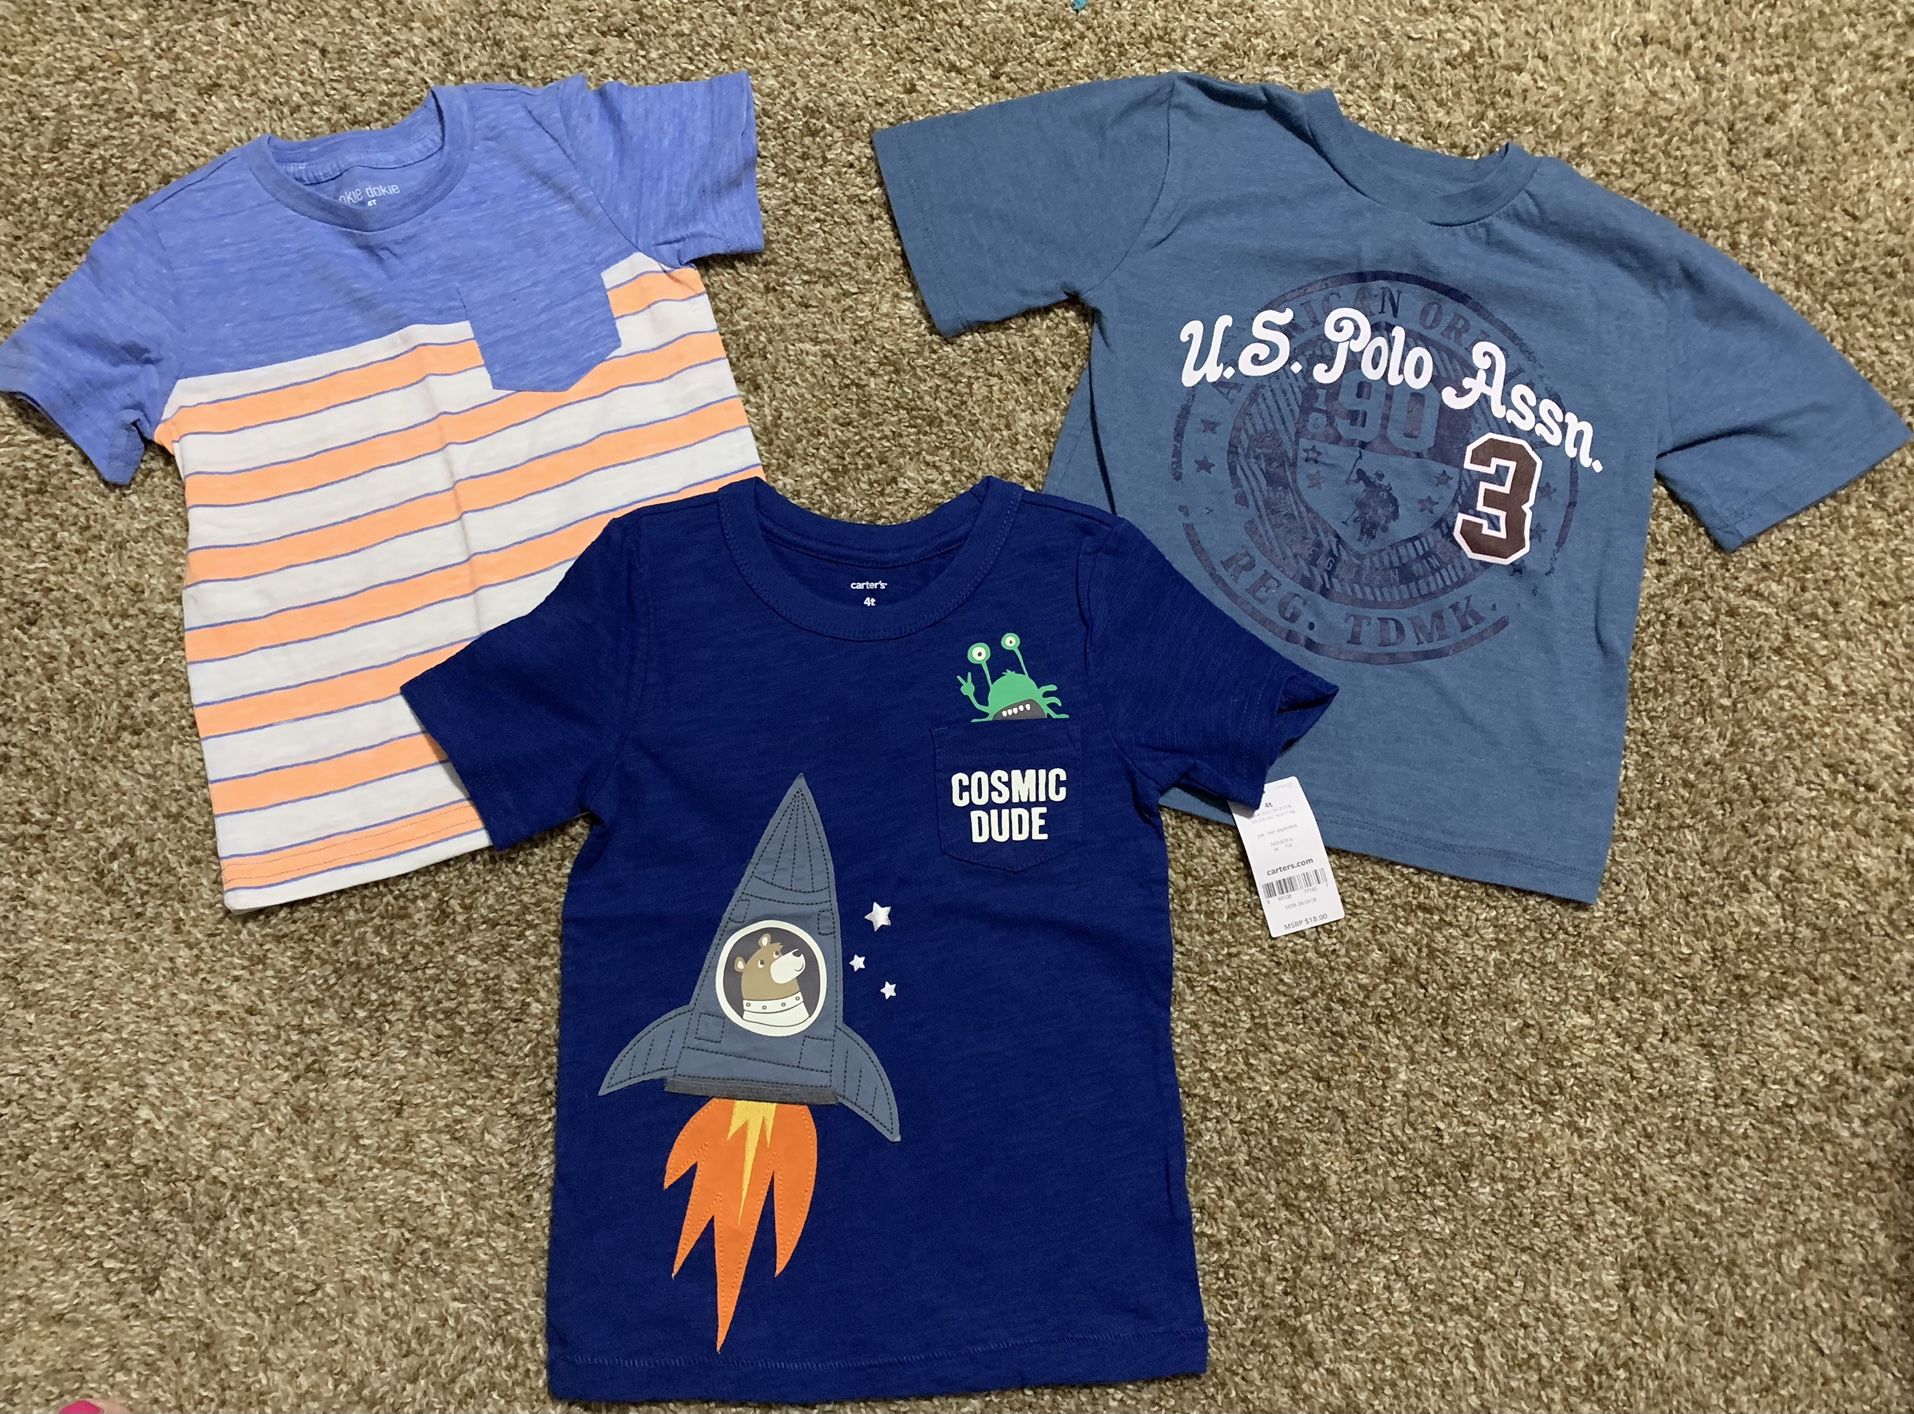 3- Boys New  and Like New T-shirts Size 4 